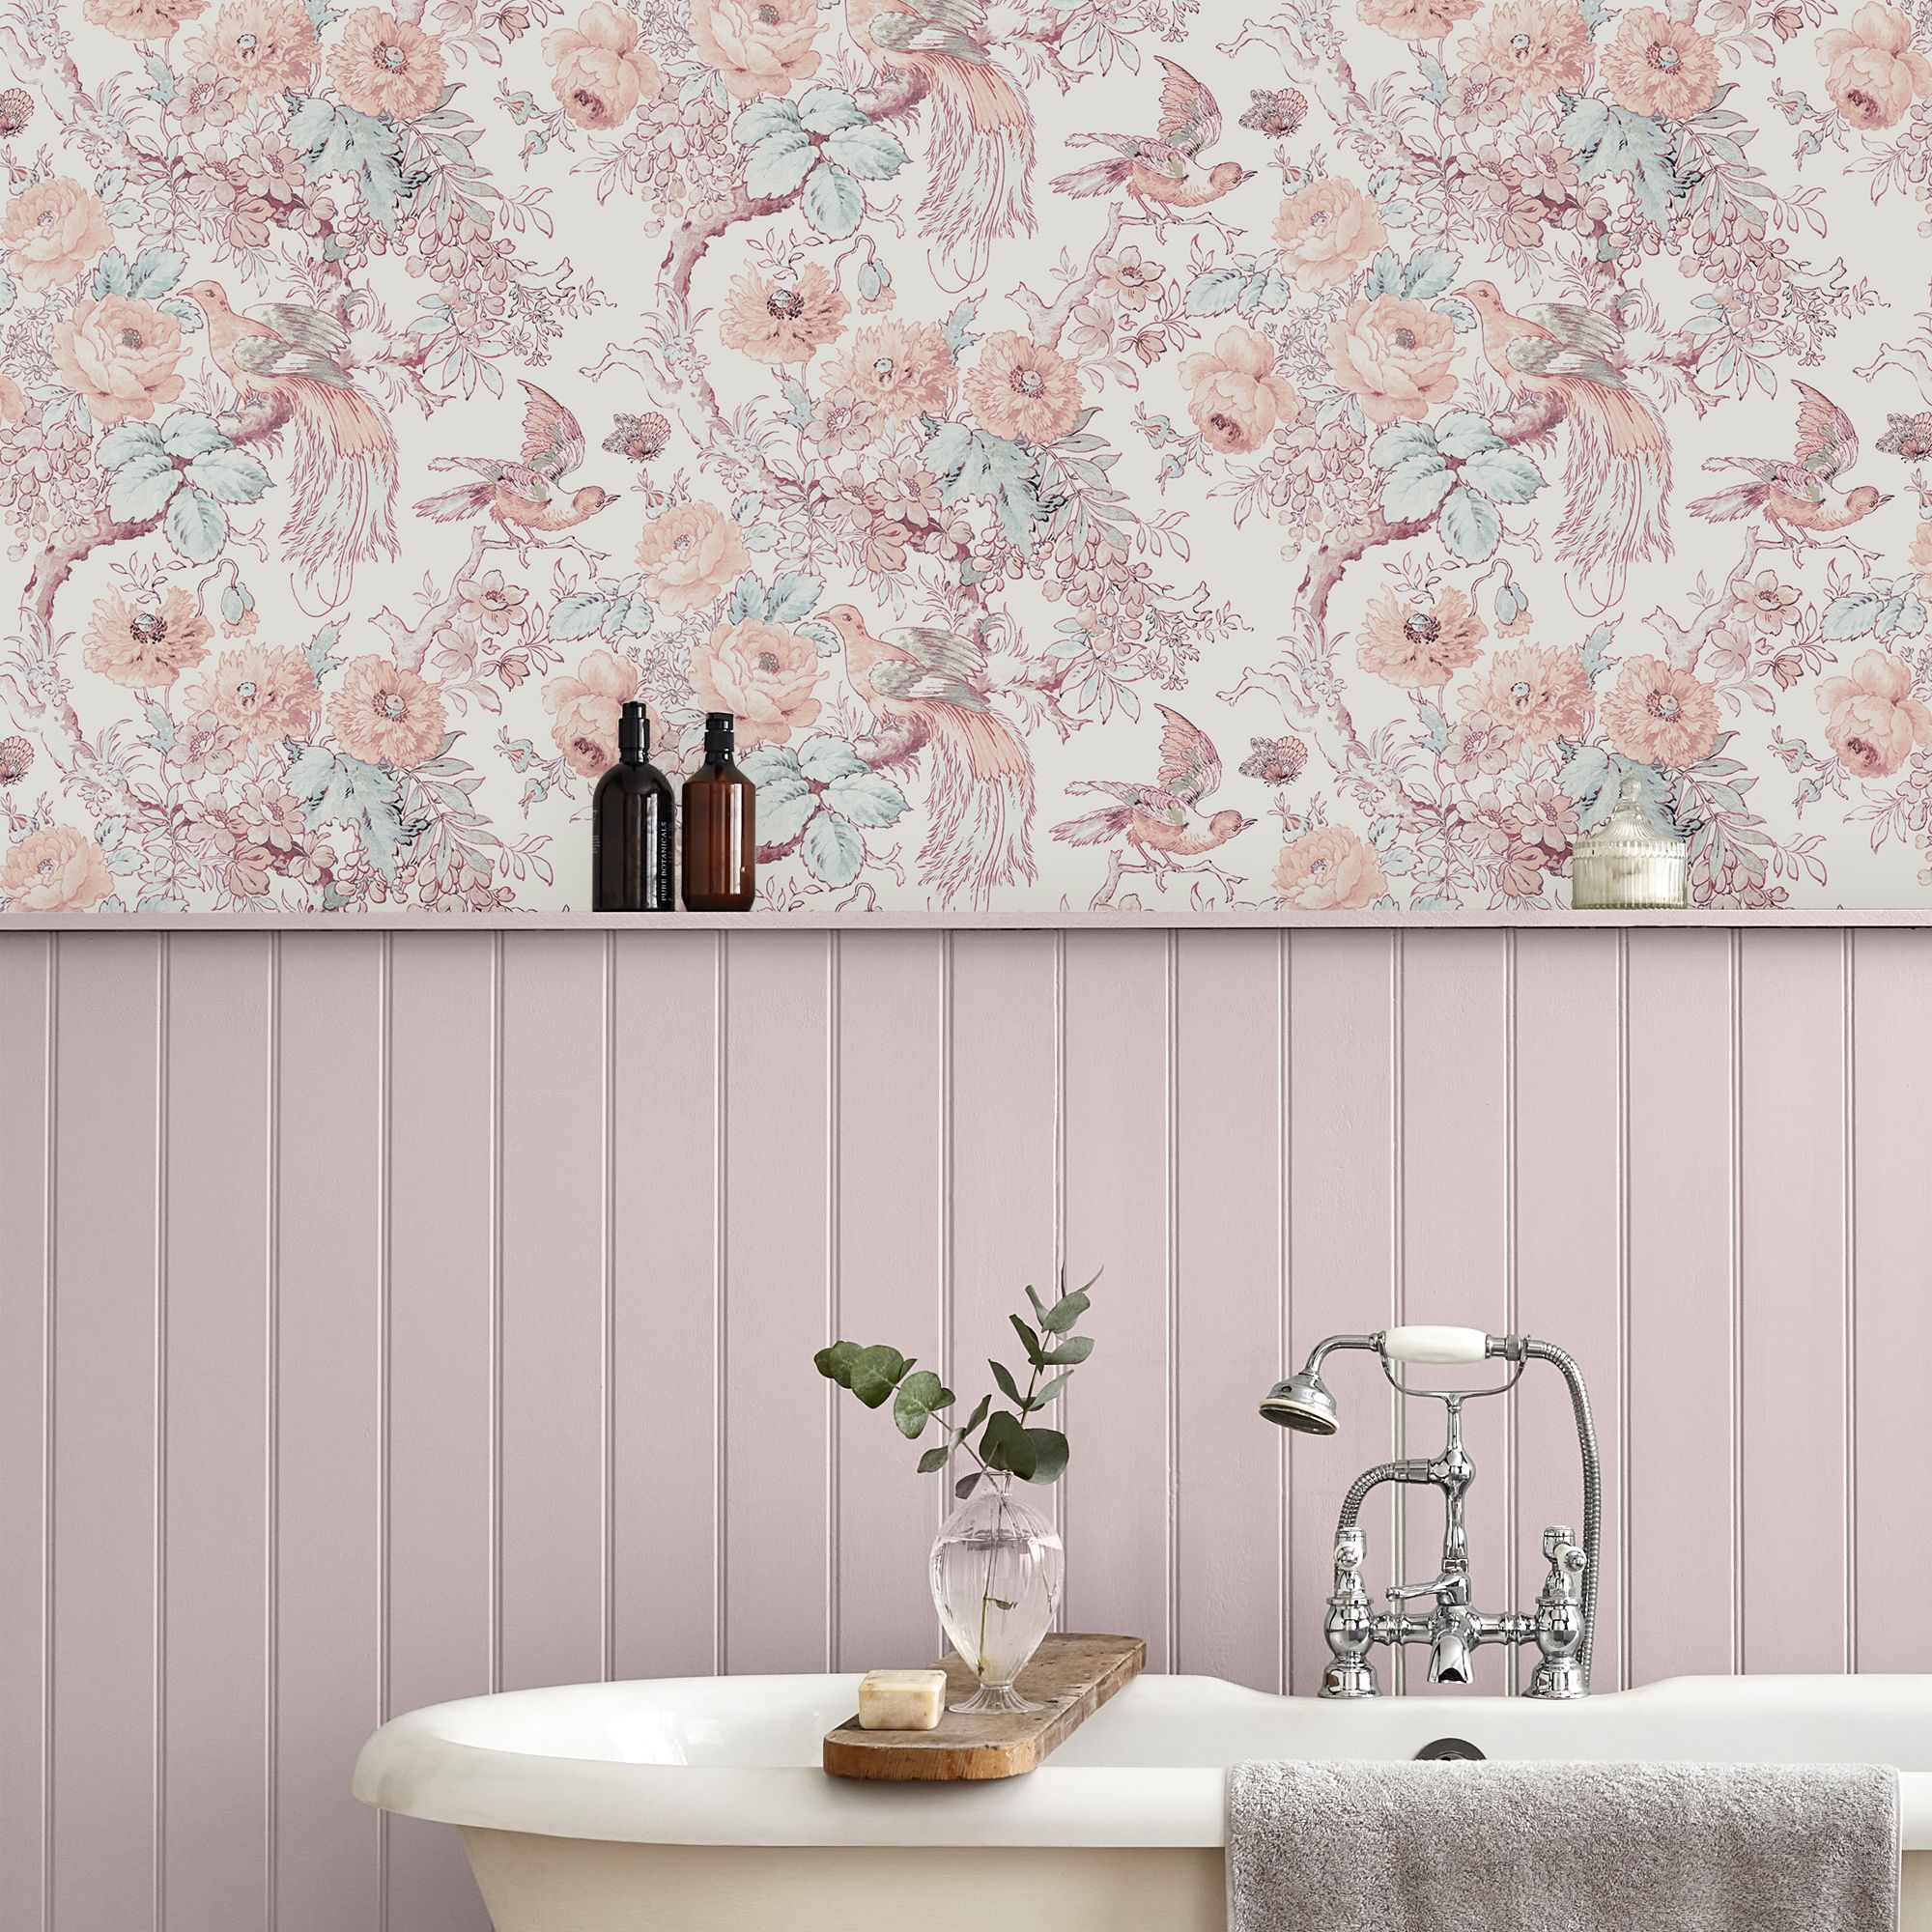 Laura Ashley Birtle Blush Floral Smooth Wallpaper